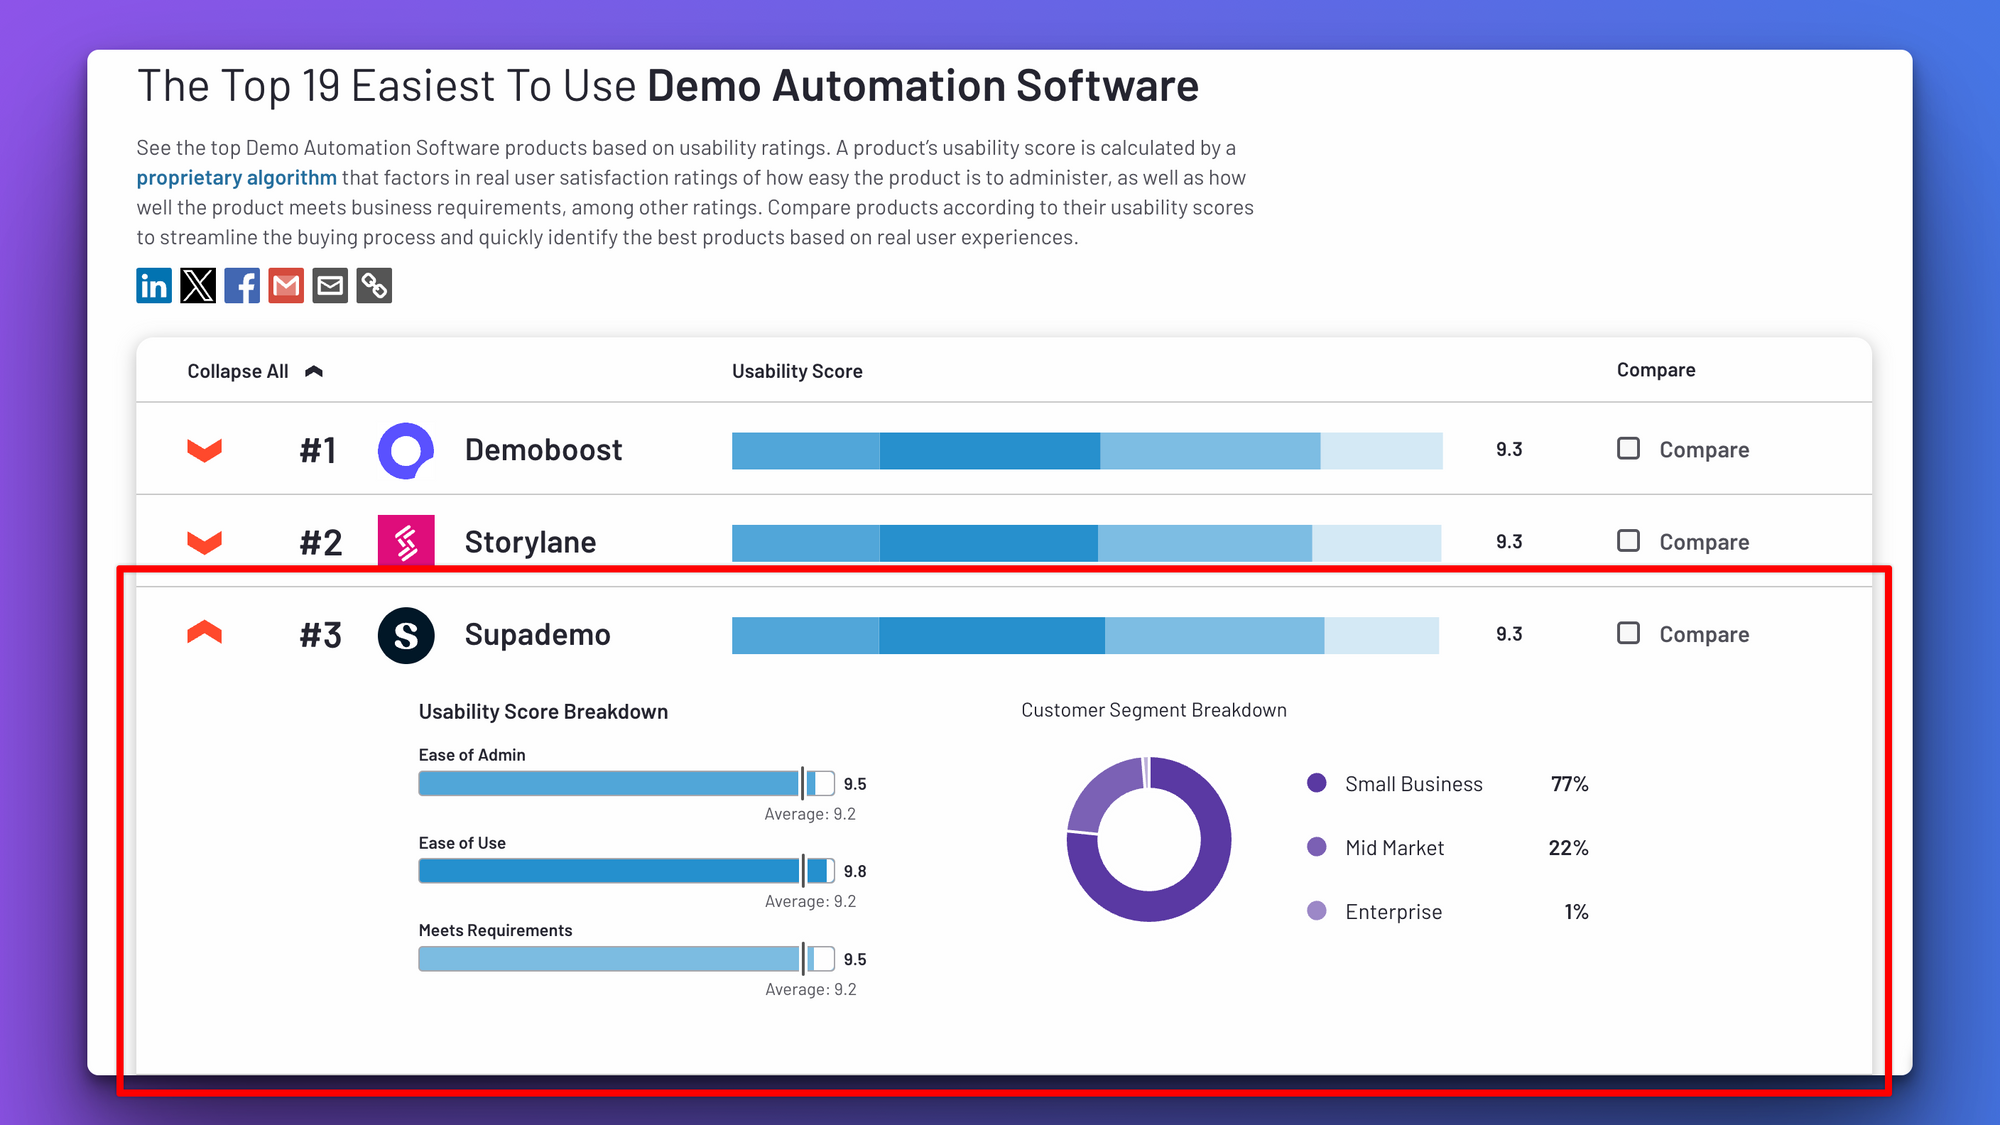 G2 review showing Supademo as one of the top ranking demo automation software in terms of usuability